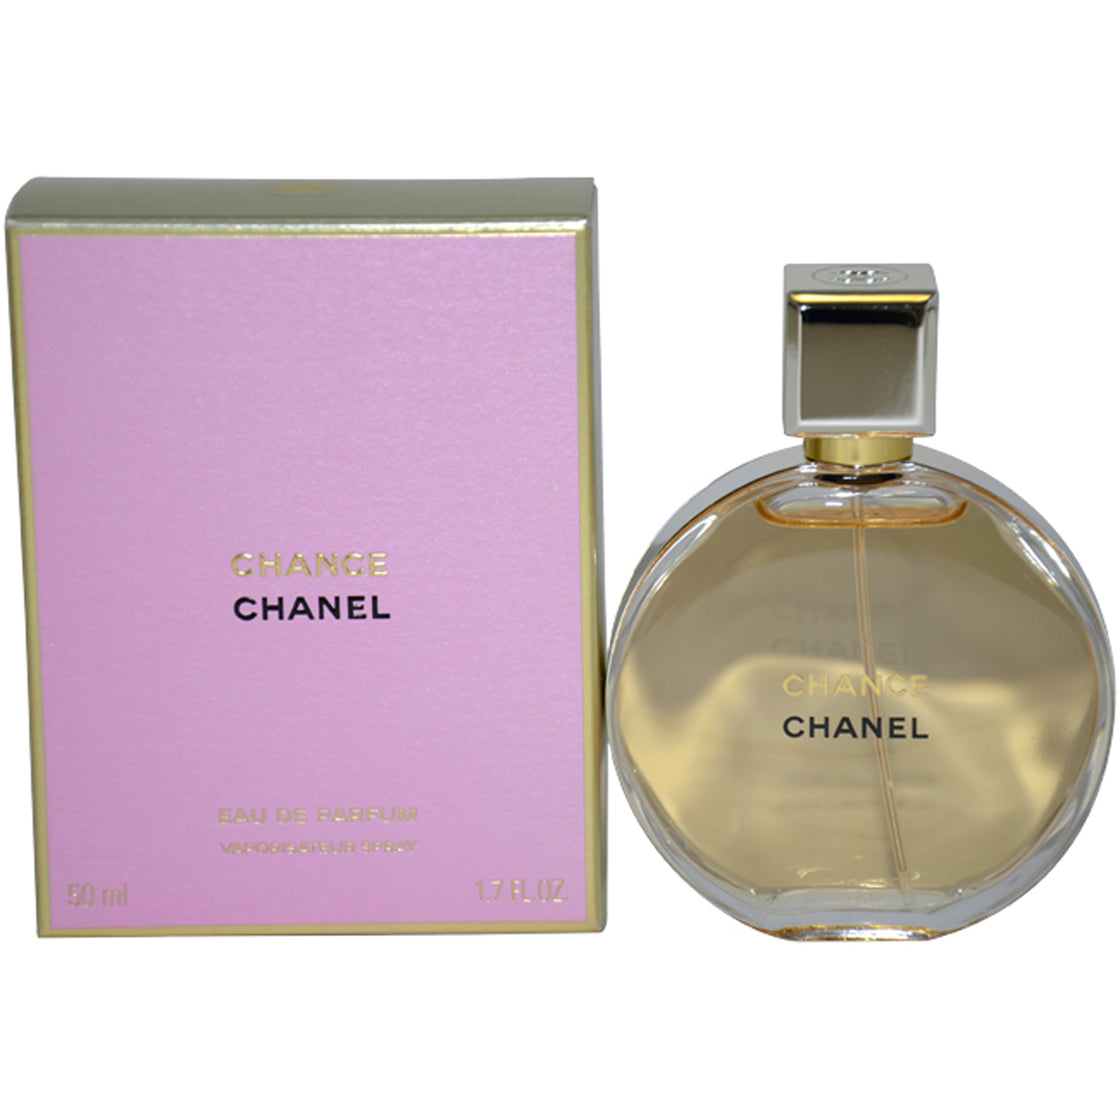 Chance by Chanel for Women - 1.7 oz EDP Spray